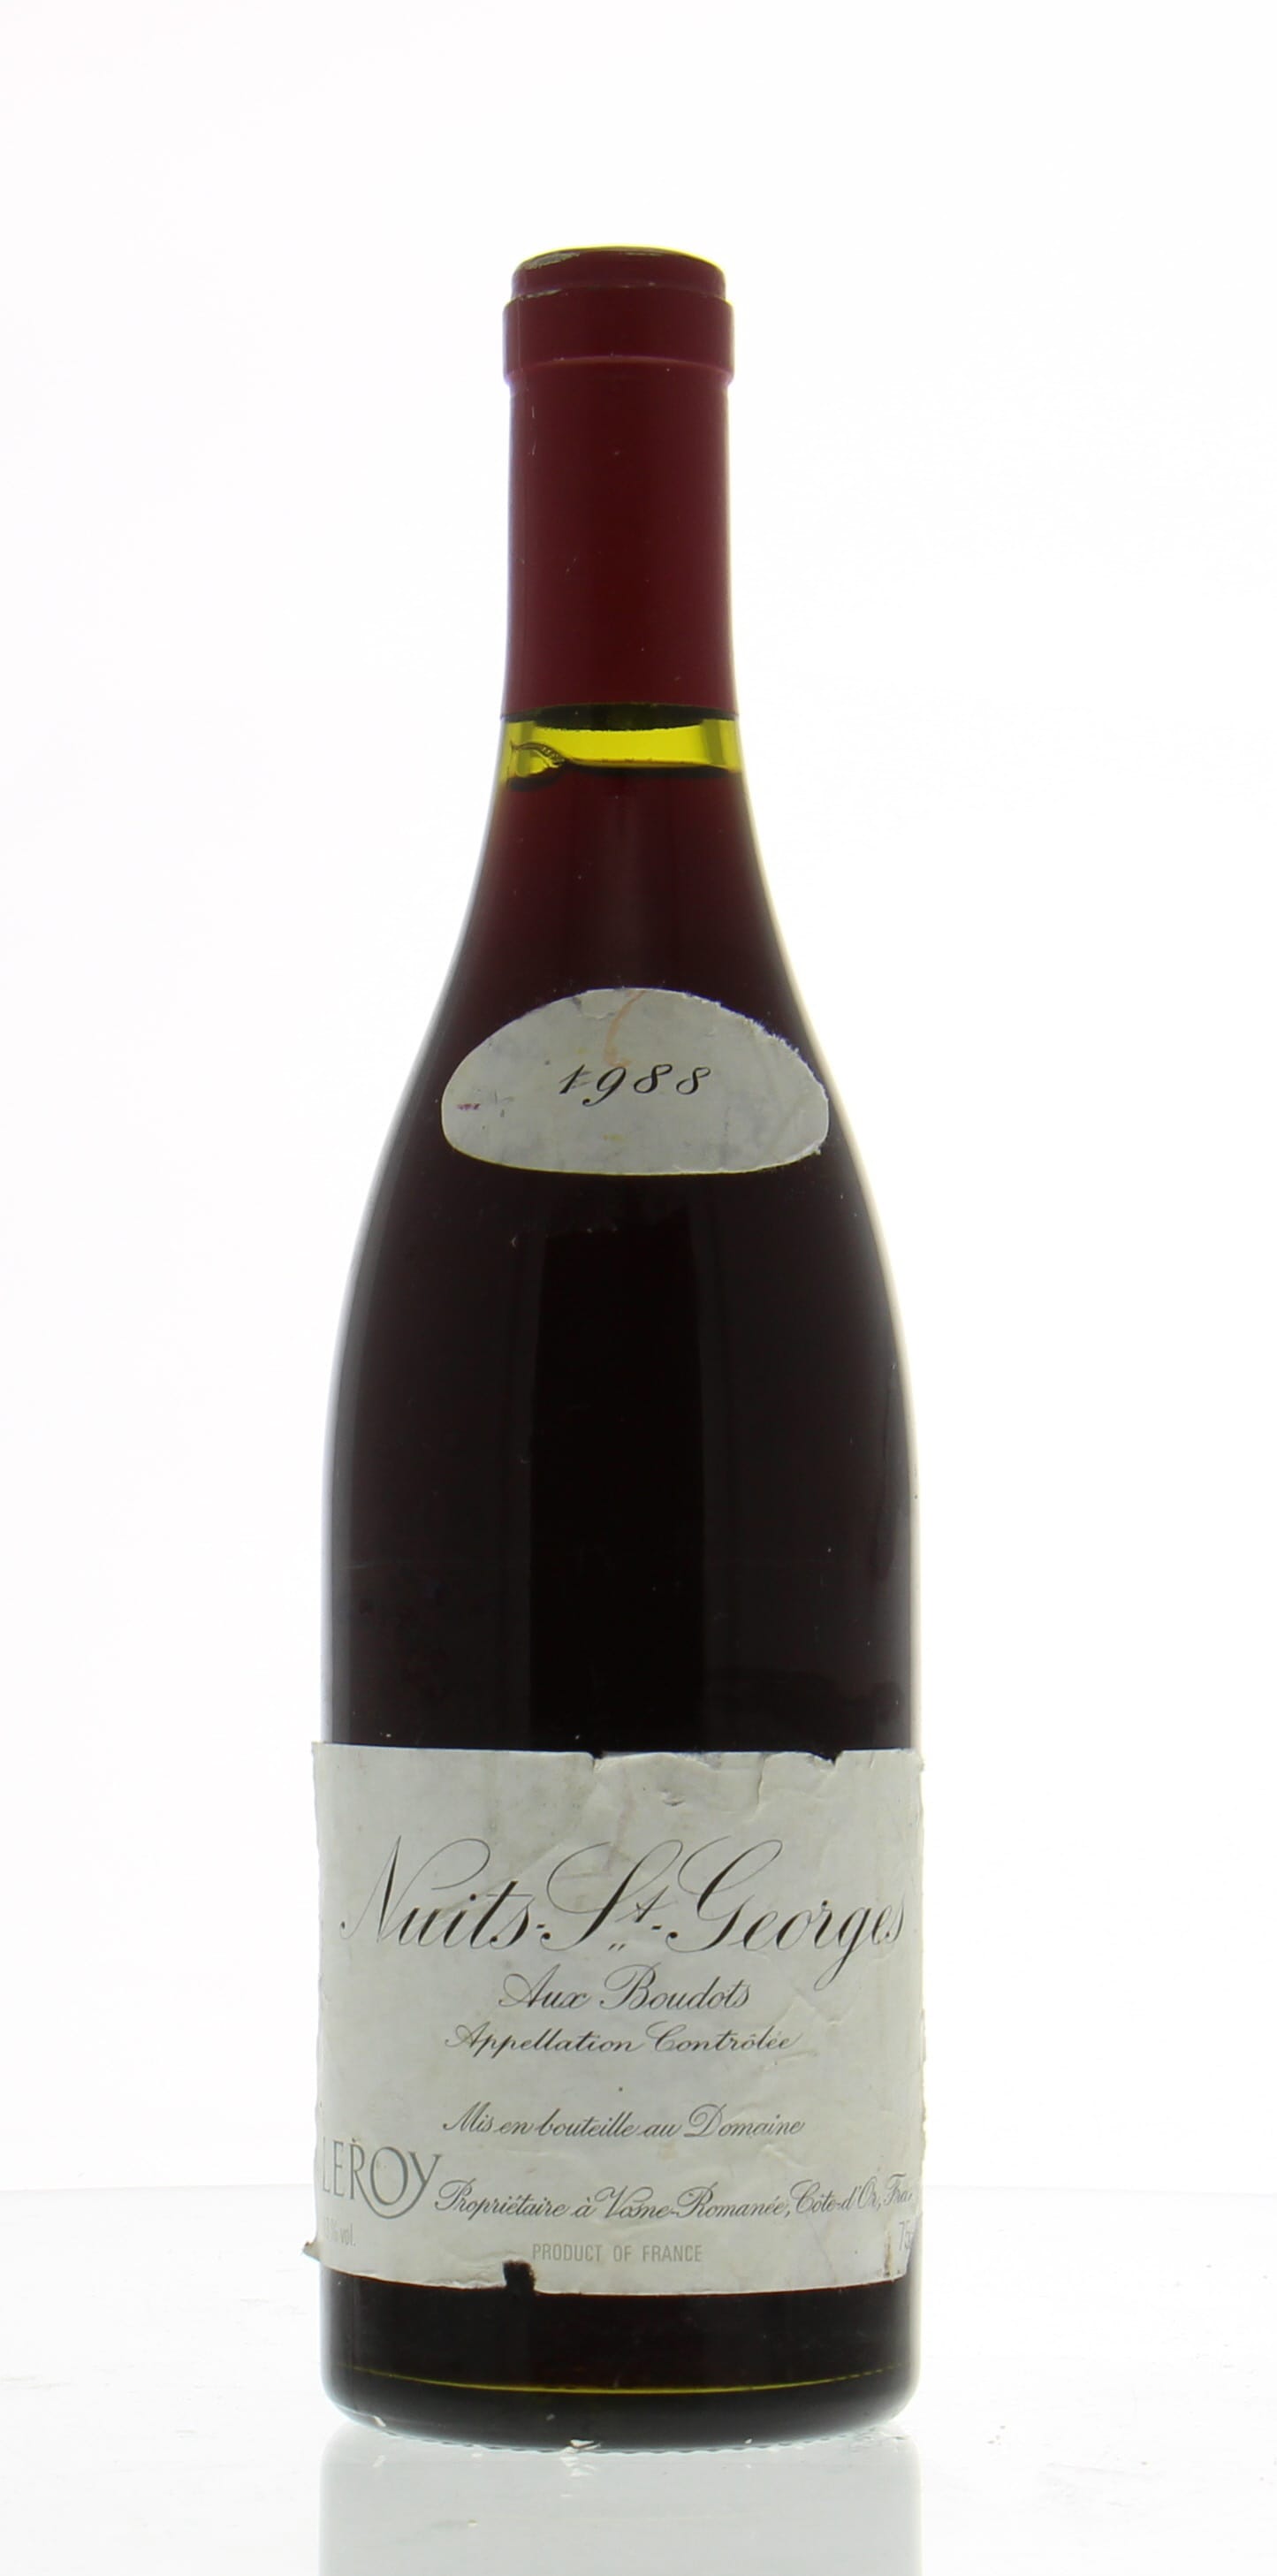 Domaine Leroy - Nuits St. Georges Les Boudots 1988 Very Good